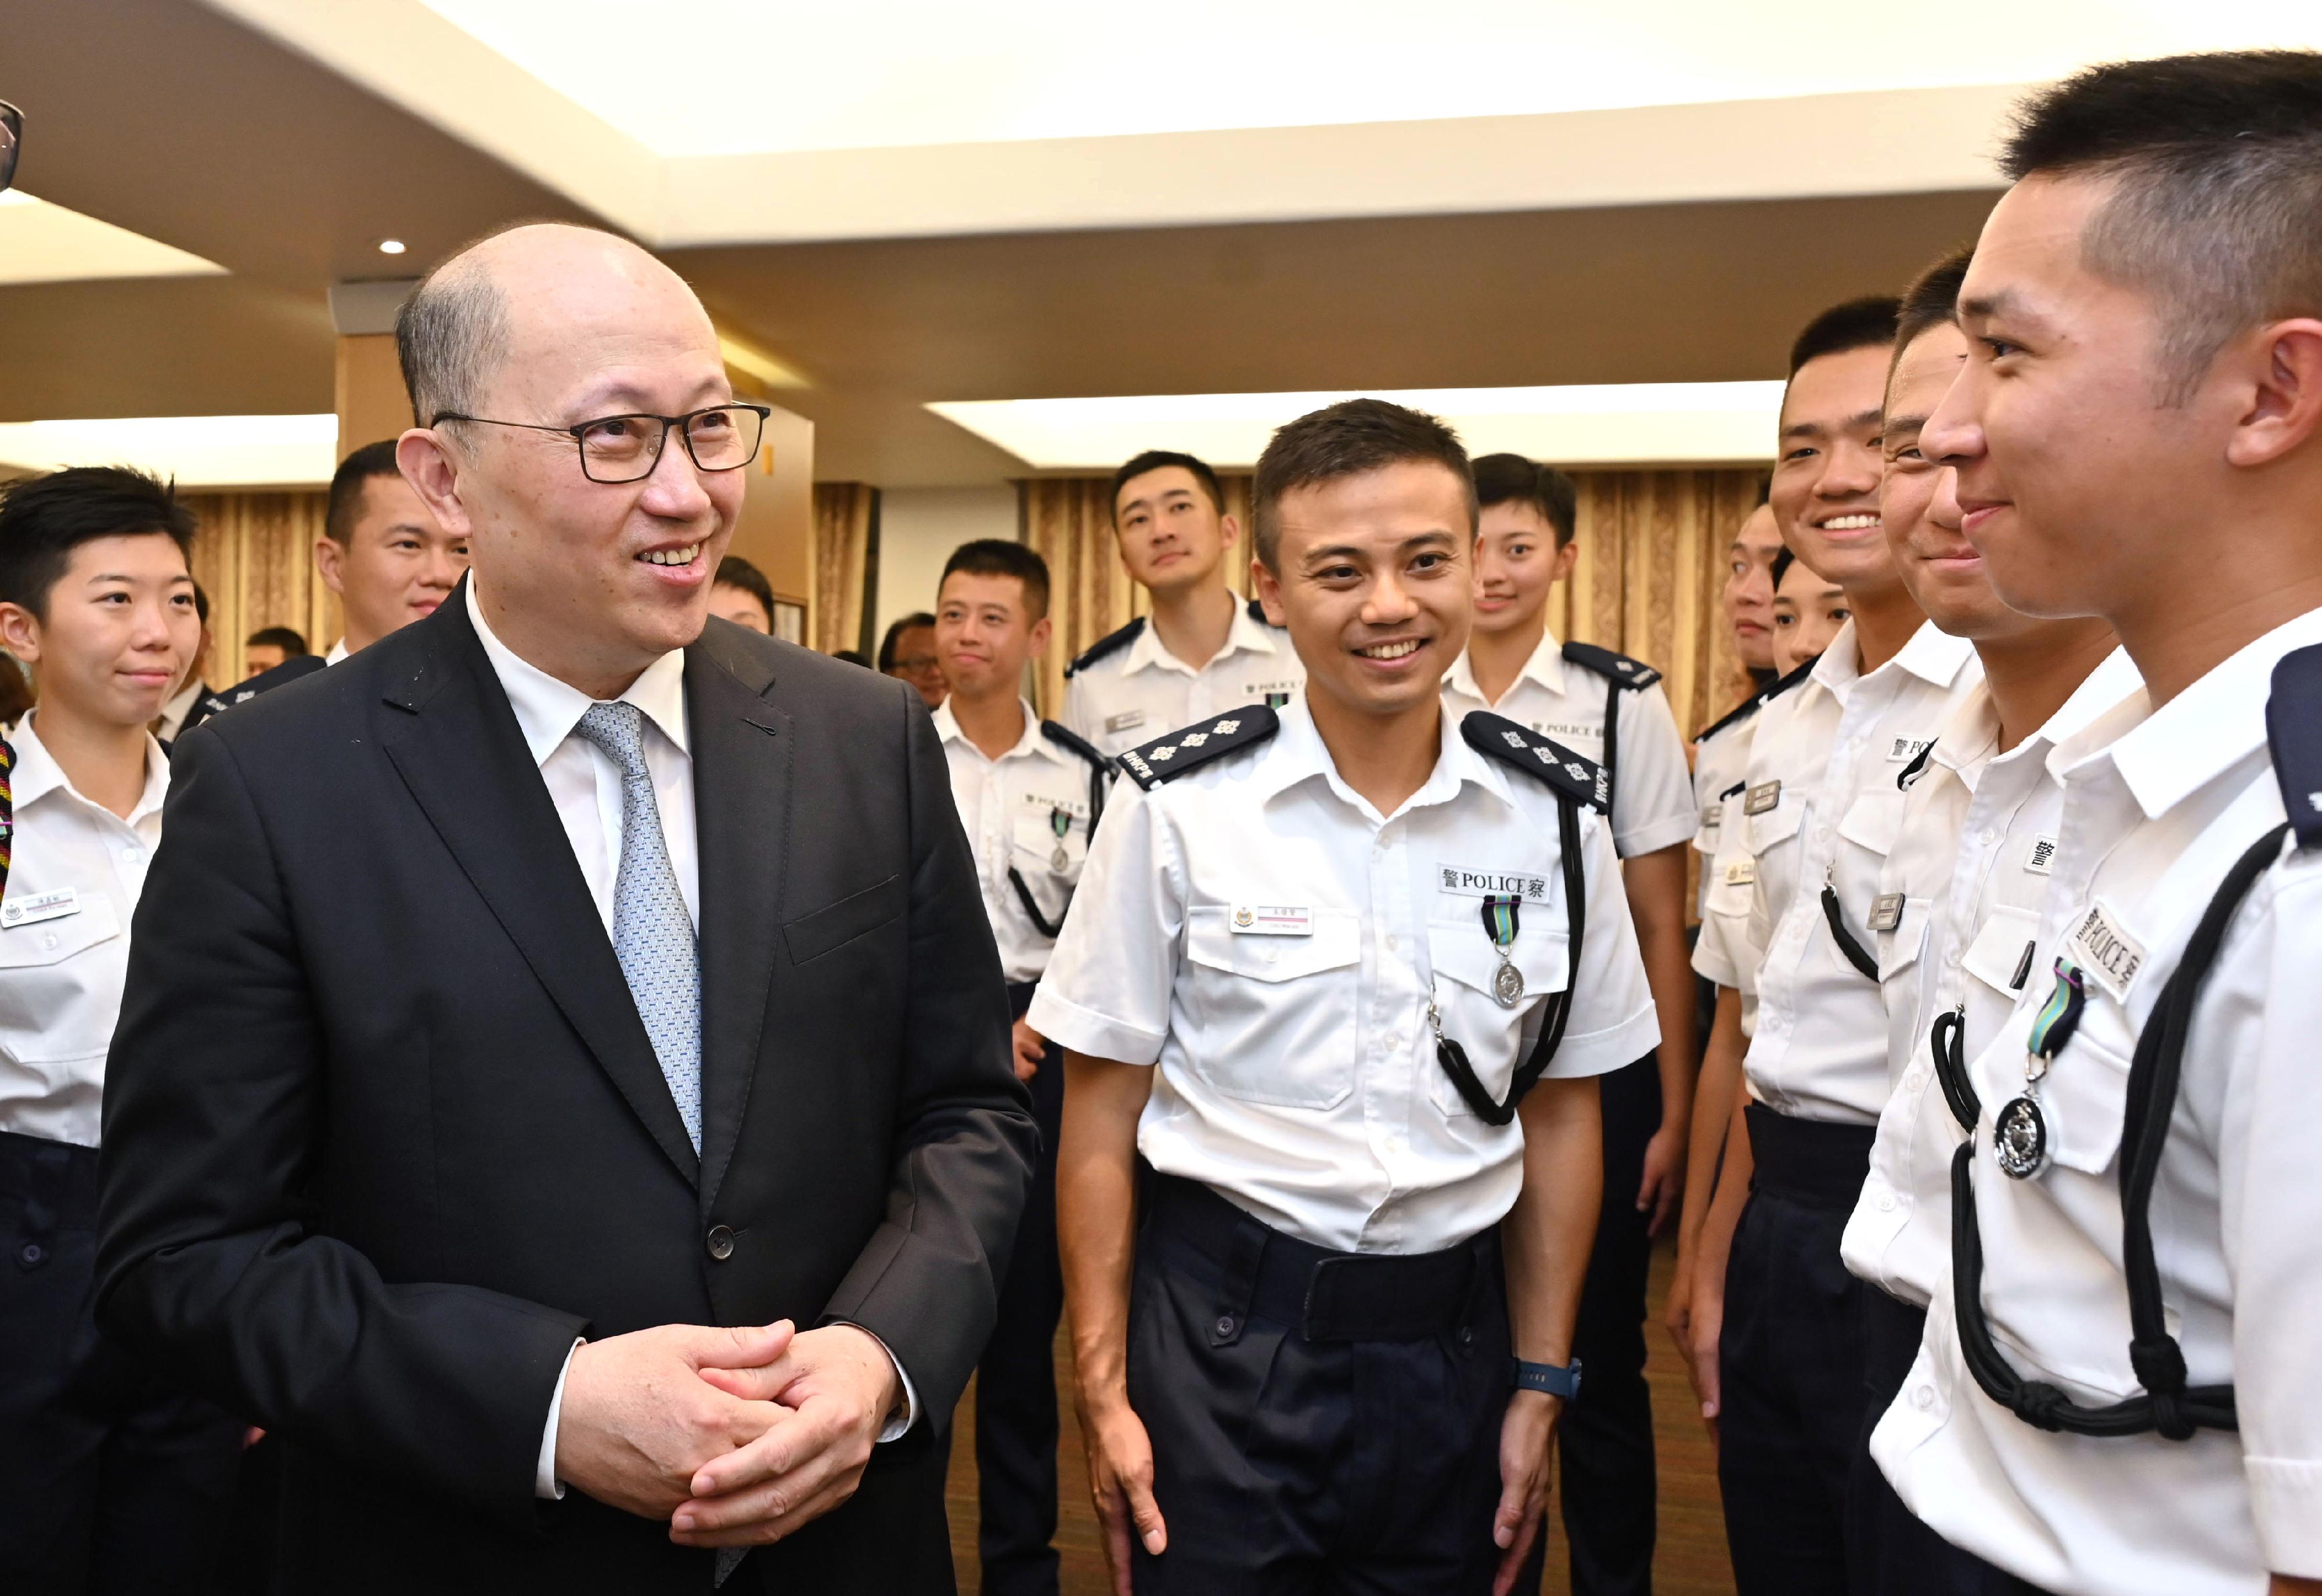 The Director of the Liaison Office of the Central People's Government in the Hong Kong Special Administrative Region, Mr Zheng Yanxiong (front row, first left), congratulates the probationary inspectors after the passing-out parade held at the Hong Kong Police College today (September 16).